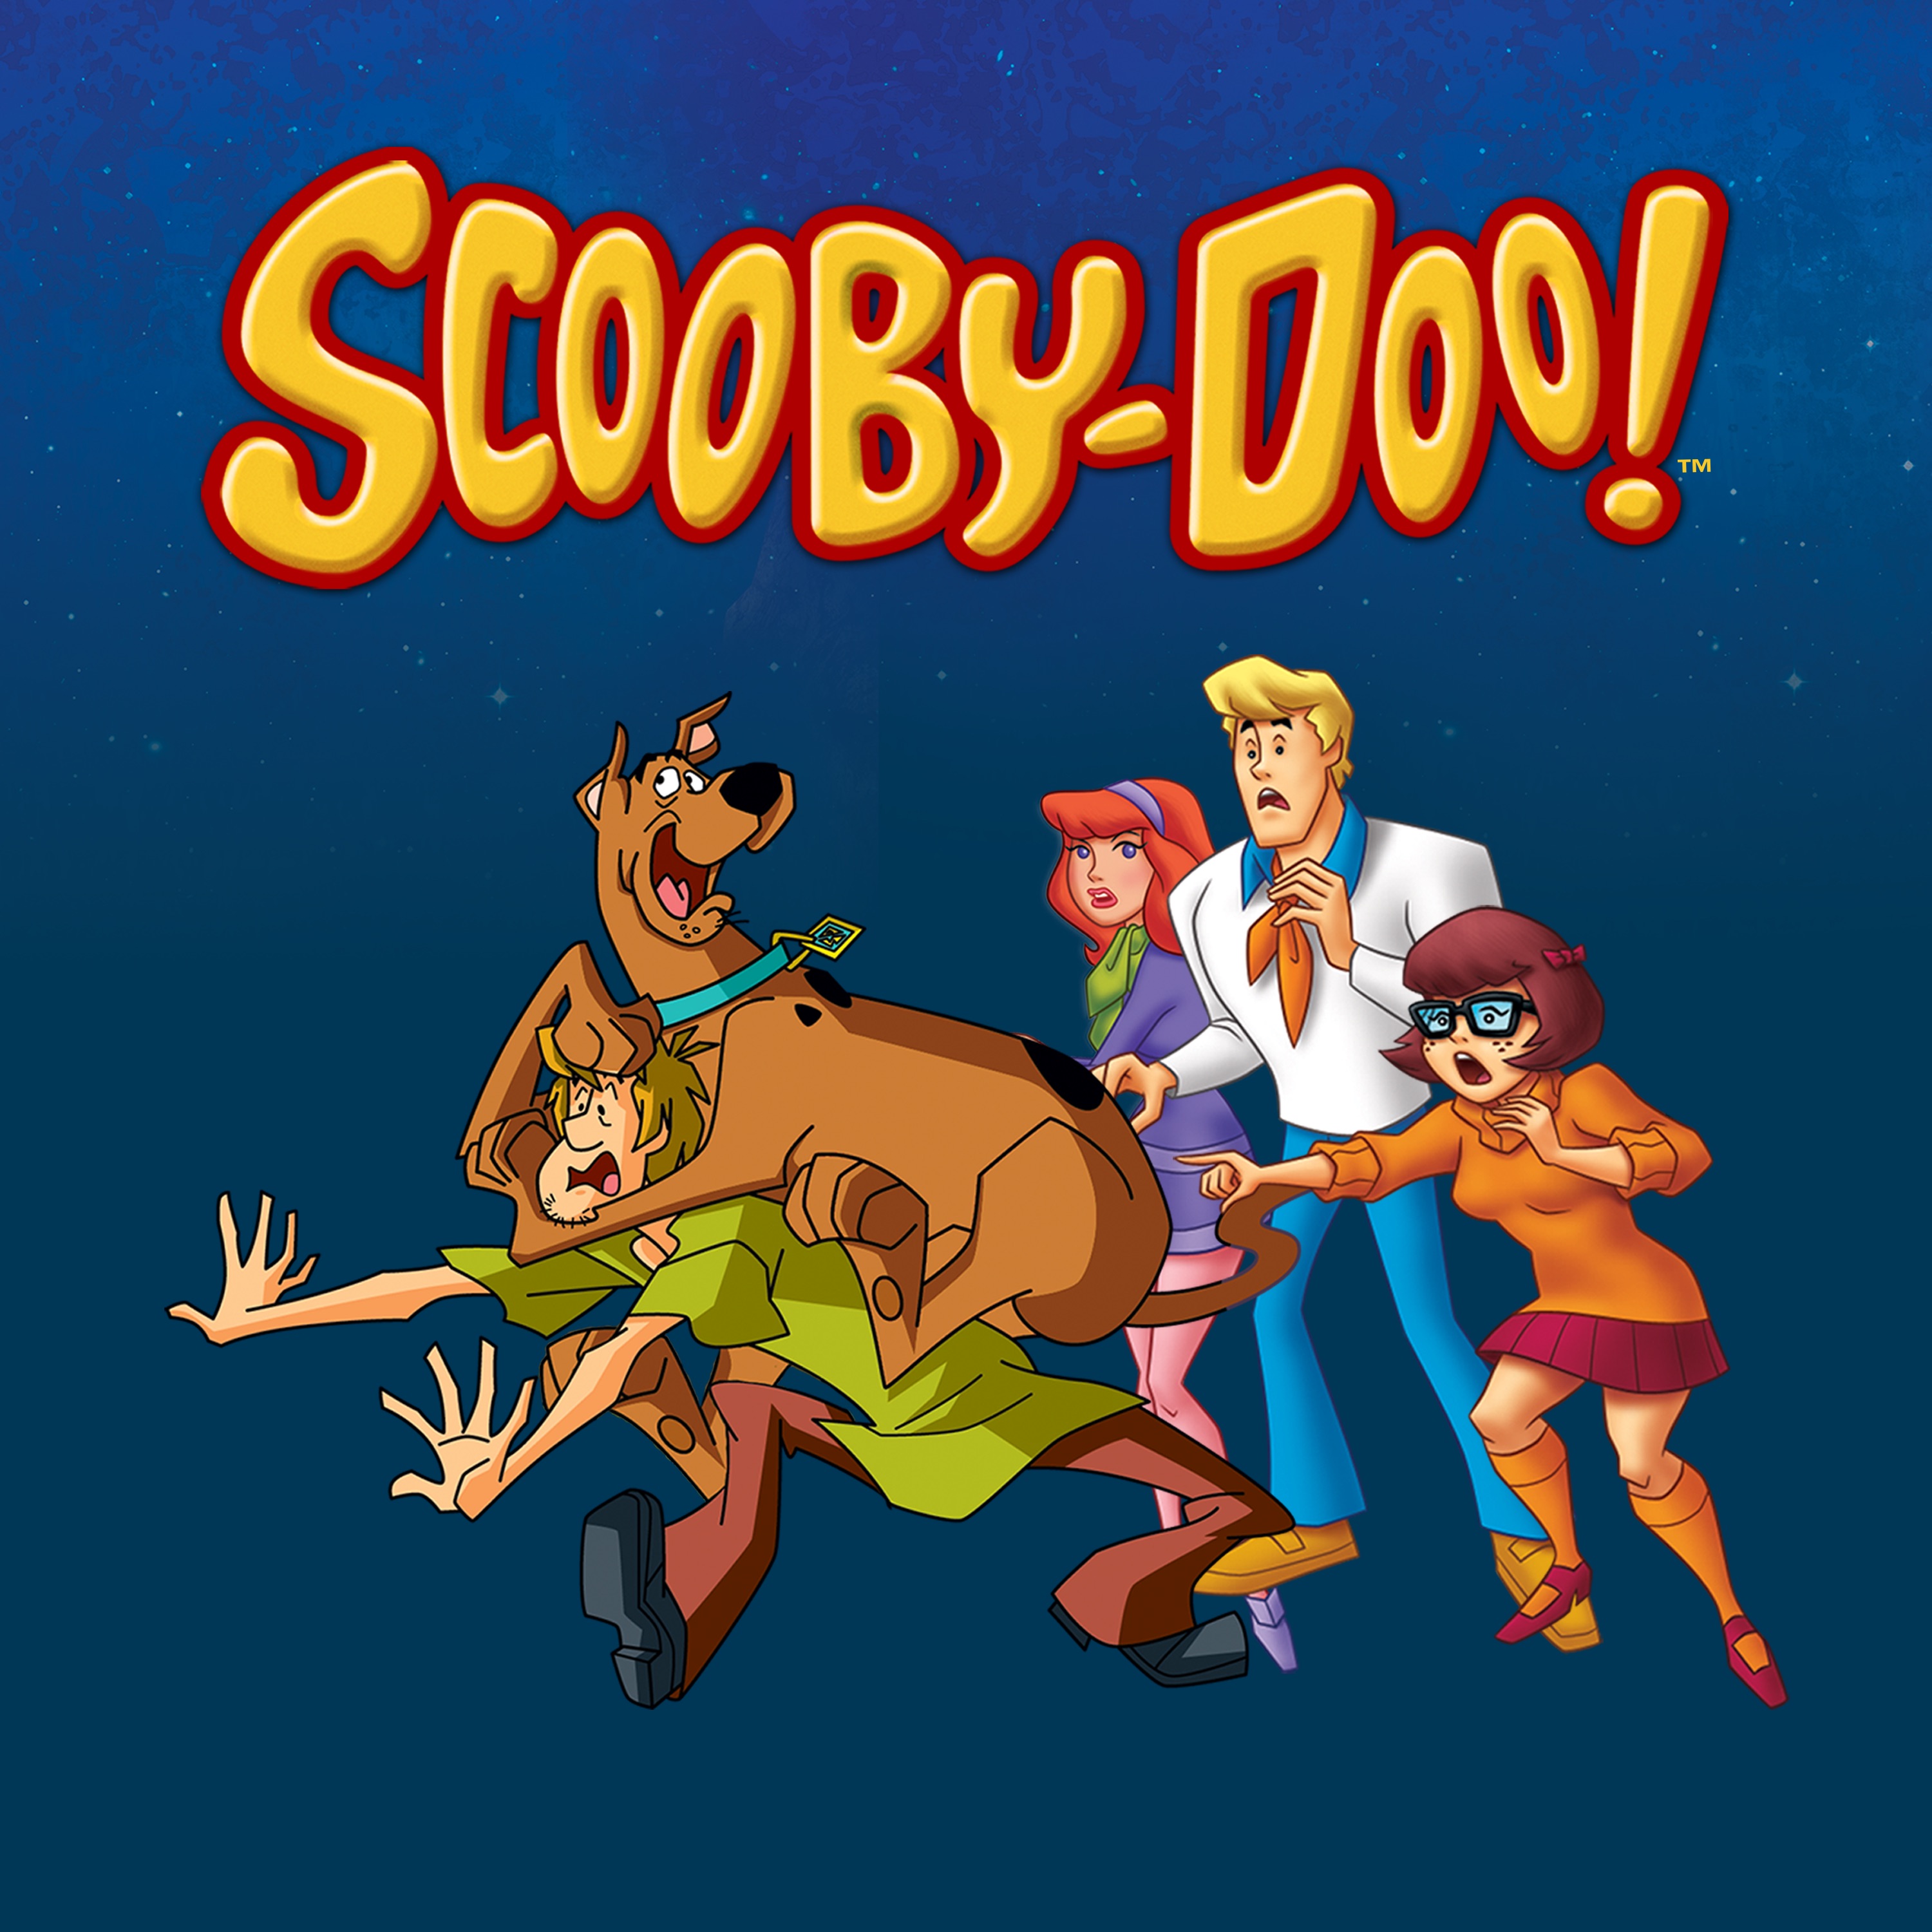 The scooby doo show jordfrench